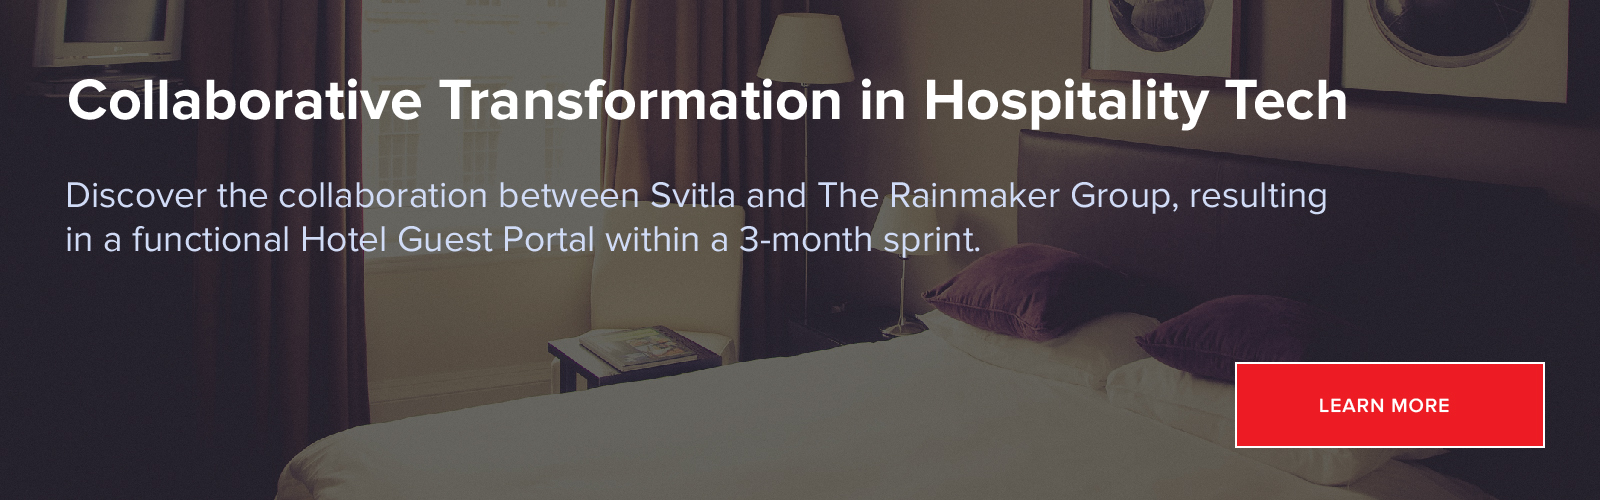 Collaborative Transformation in Hospitality Tech